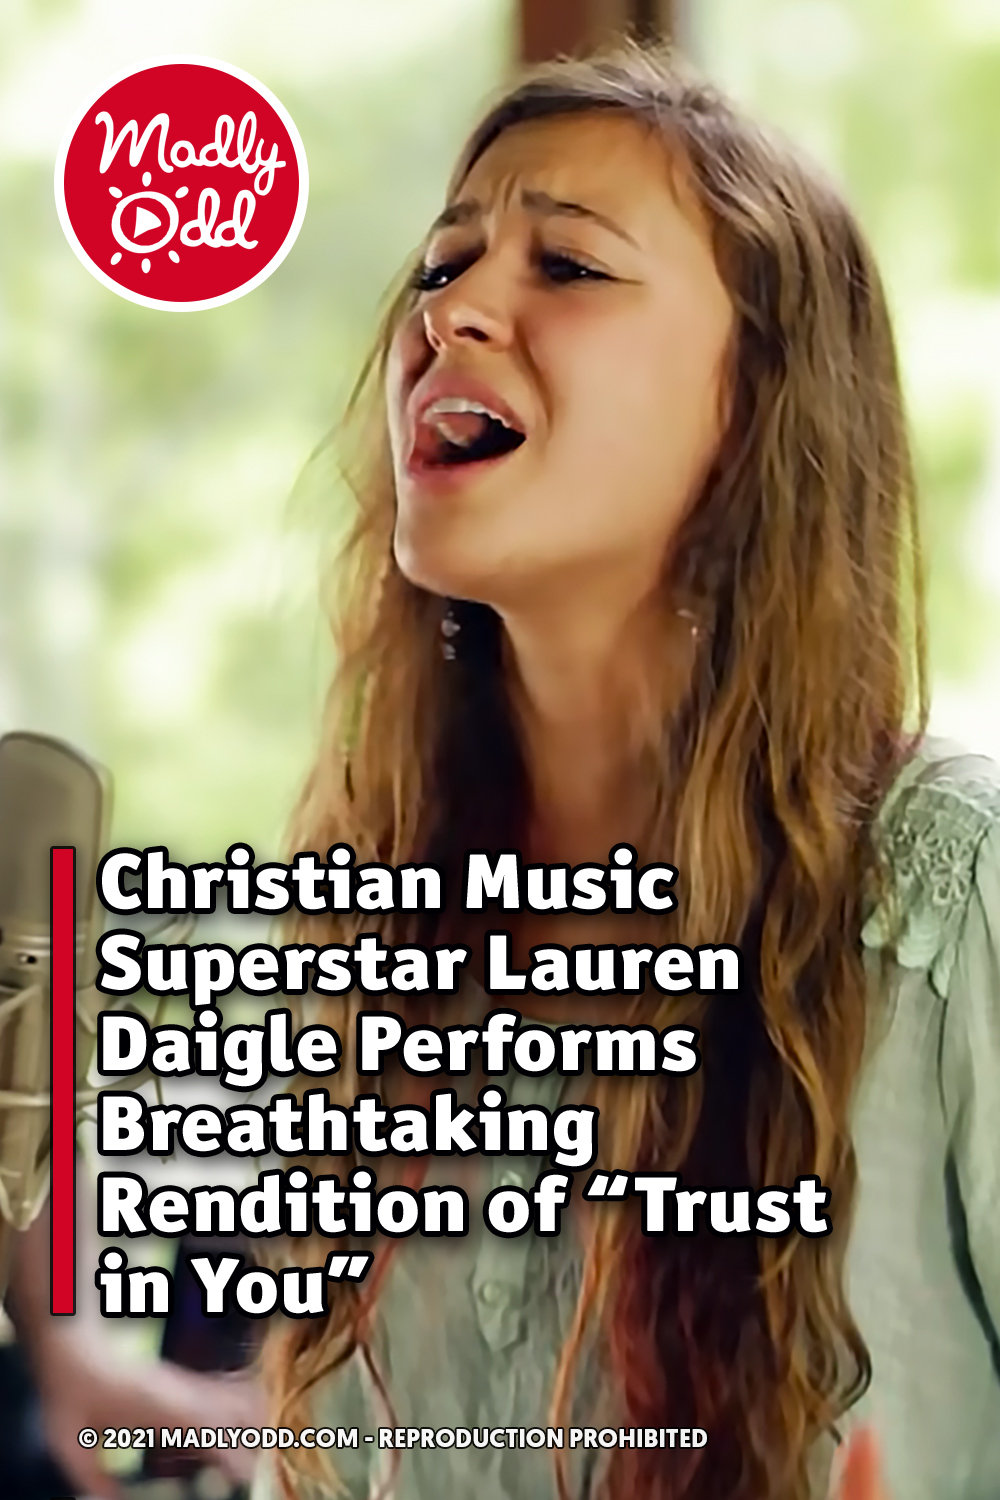 Christian Music Superstar Lauren Daigle Performs Breathtaking Rendition of “Trust in You”